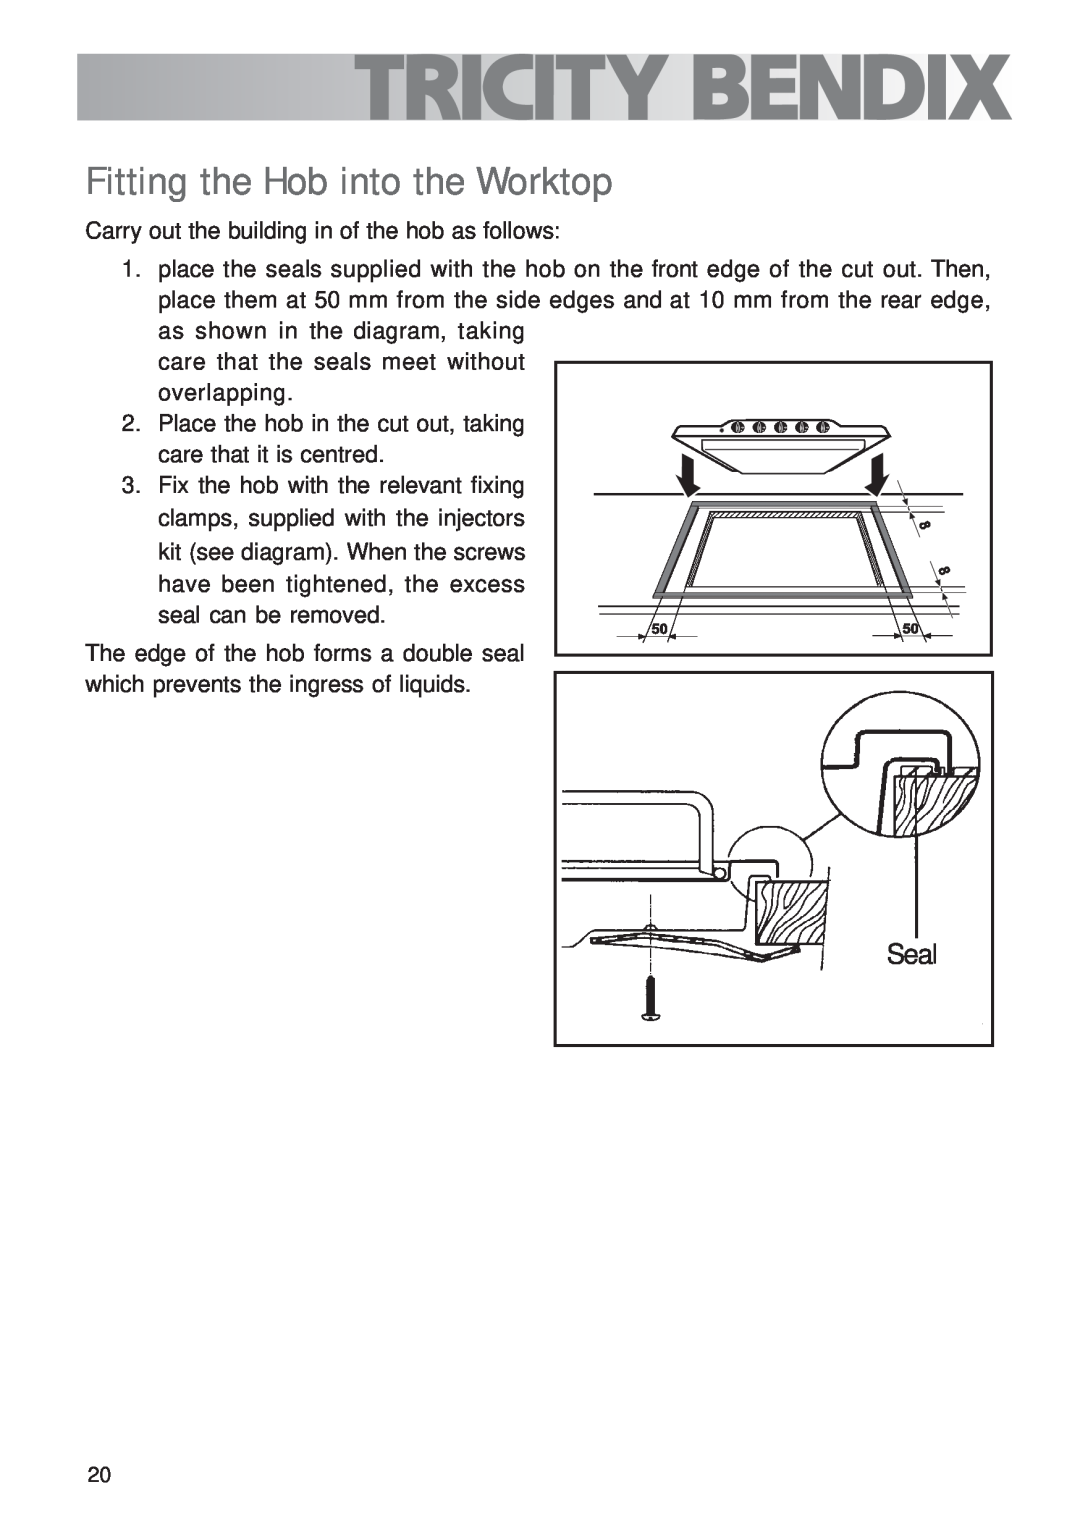 Tricity Bendix TBG700 user manual Fitting the Hob into the Worktop, Seal 